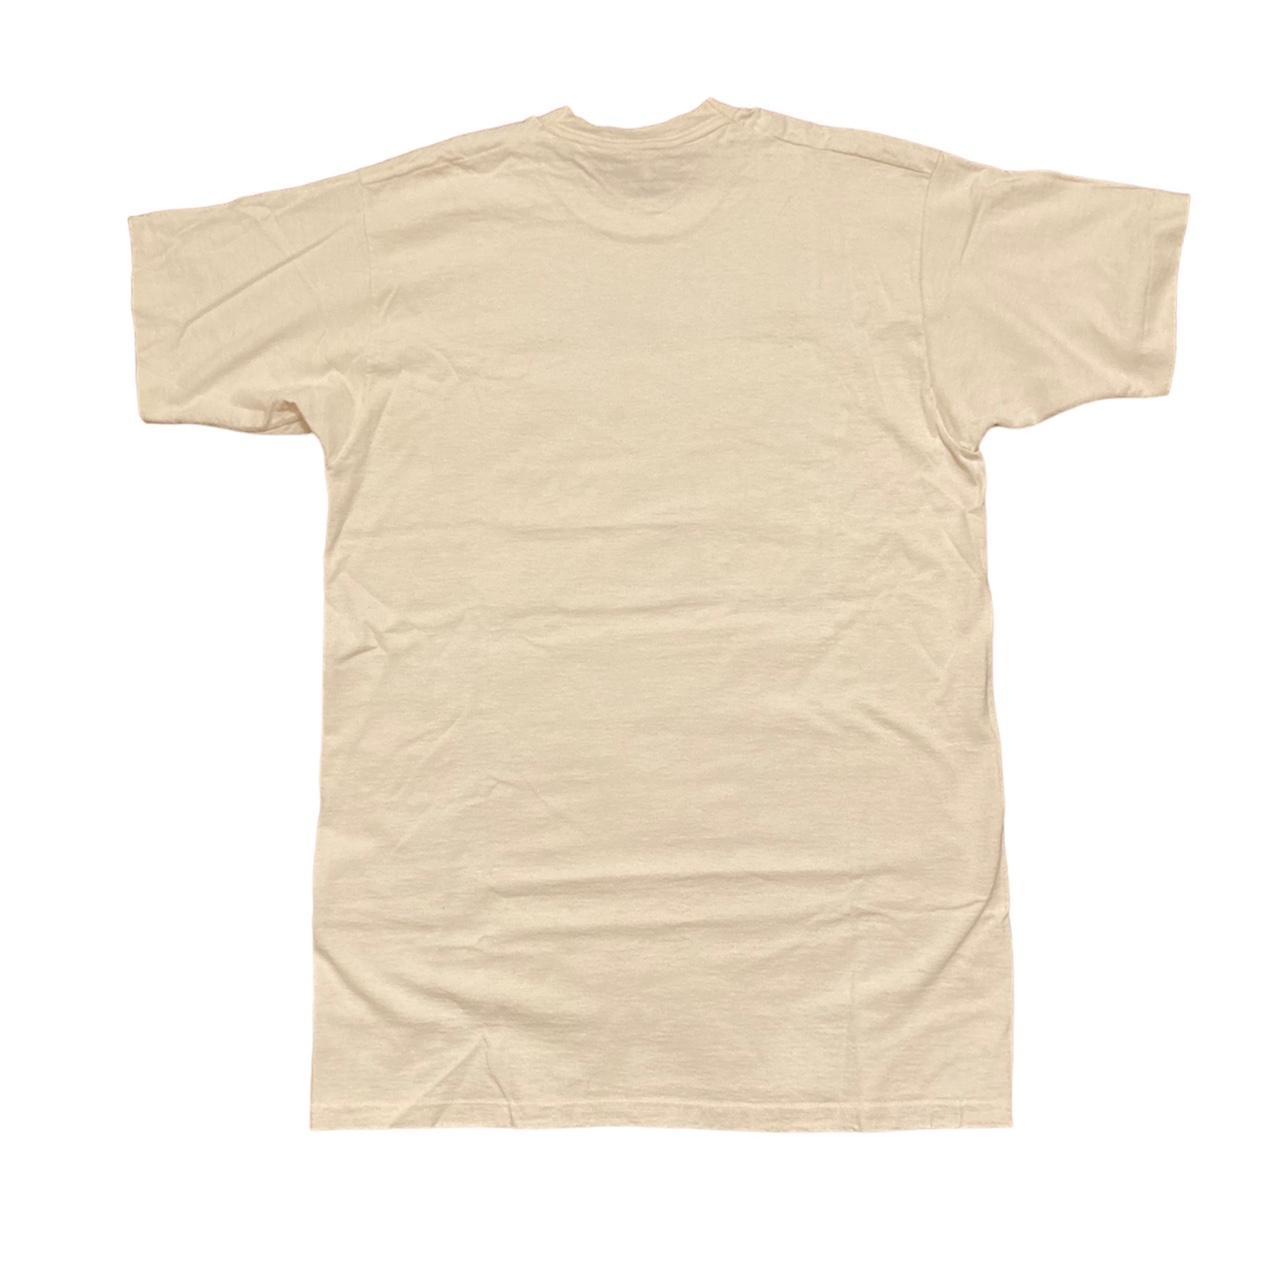 Fruit of the Loom Men's Cream and Purple T-shirt (3)